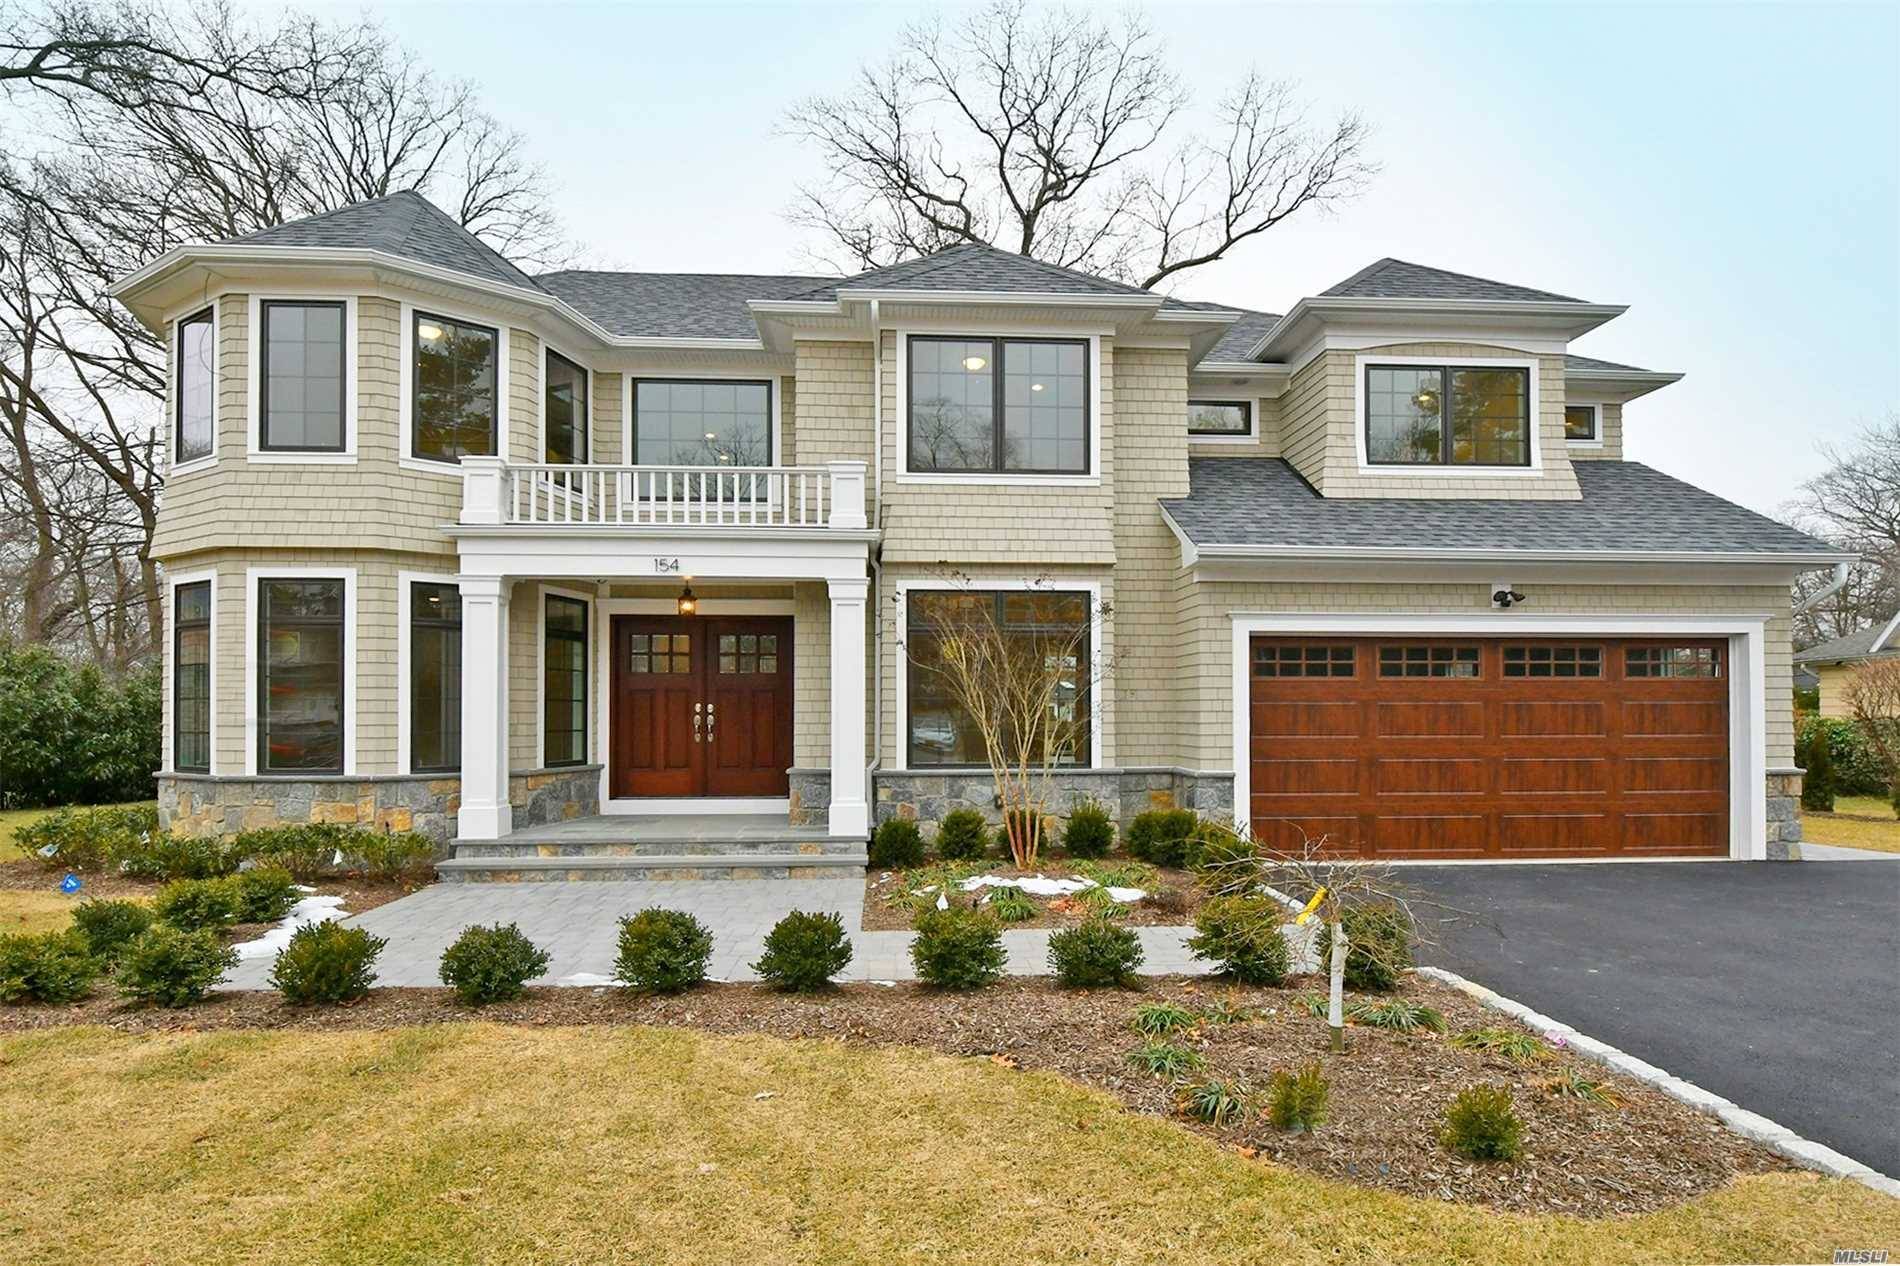 HUGE PRICE REDUCTION. Amazing New Construction With Extraordinary Craftsmanship.